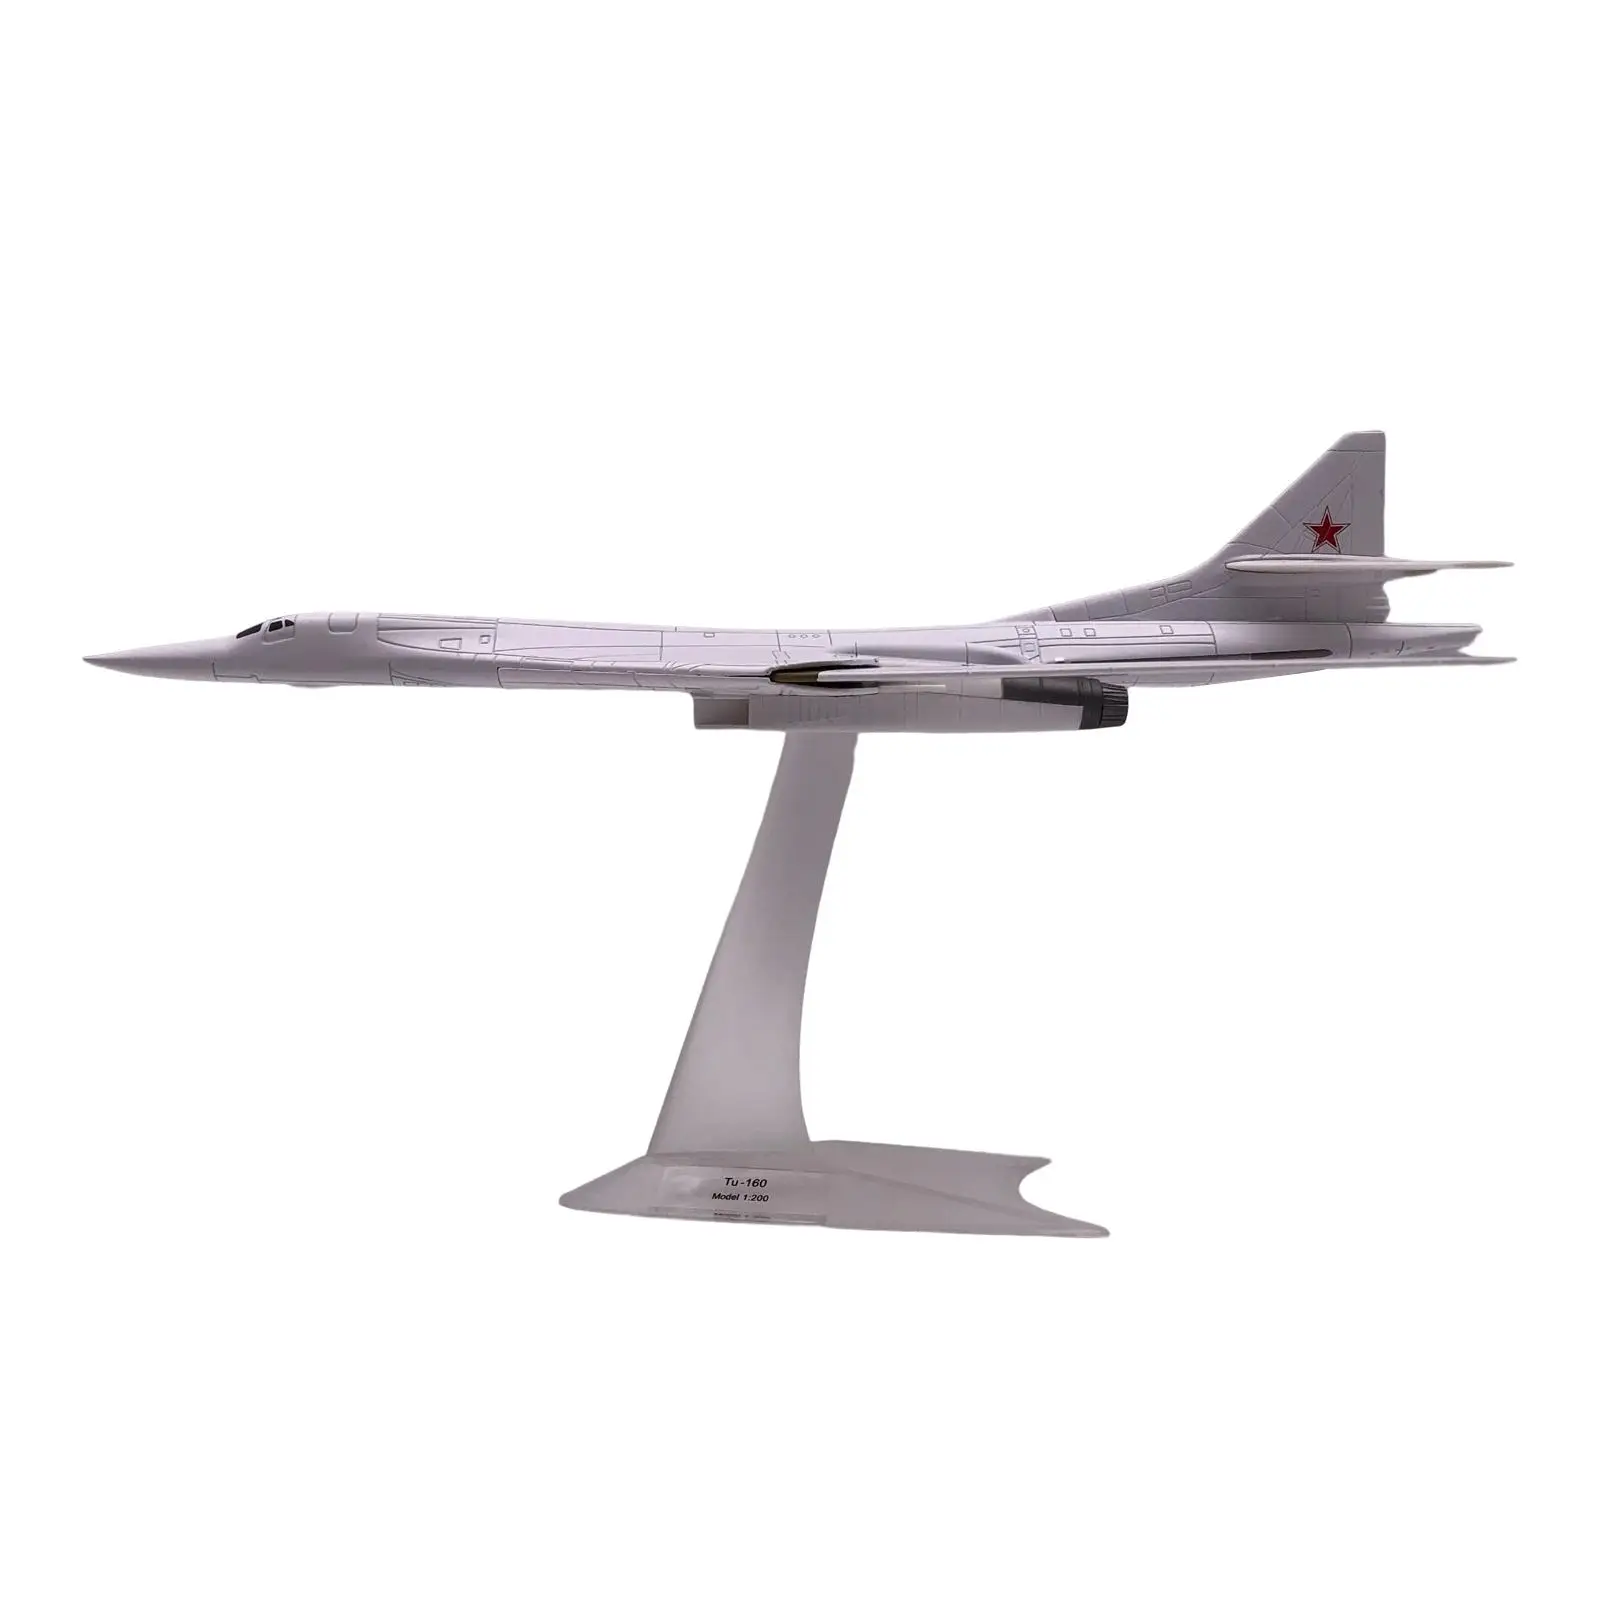 3D Bomber Fighter Model Plain Ornament Hobby Table with Stand 1:200 Scale Air Planes Diecast for Bedroom Desktop Home Decoration